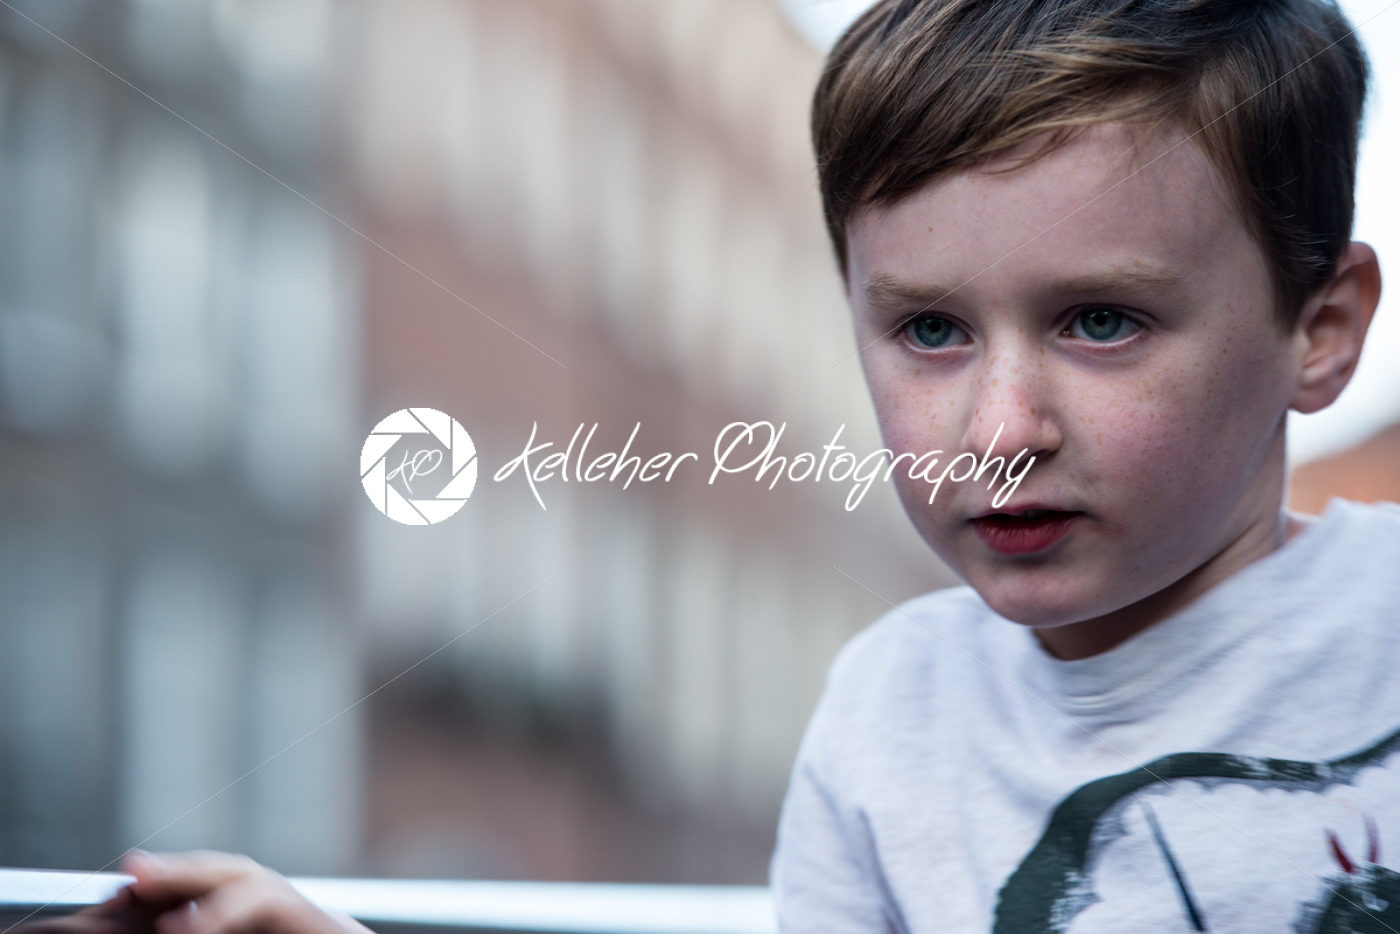 Young little boy portrait looking at something - Kelleher Photography Store